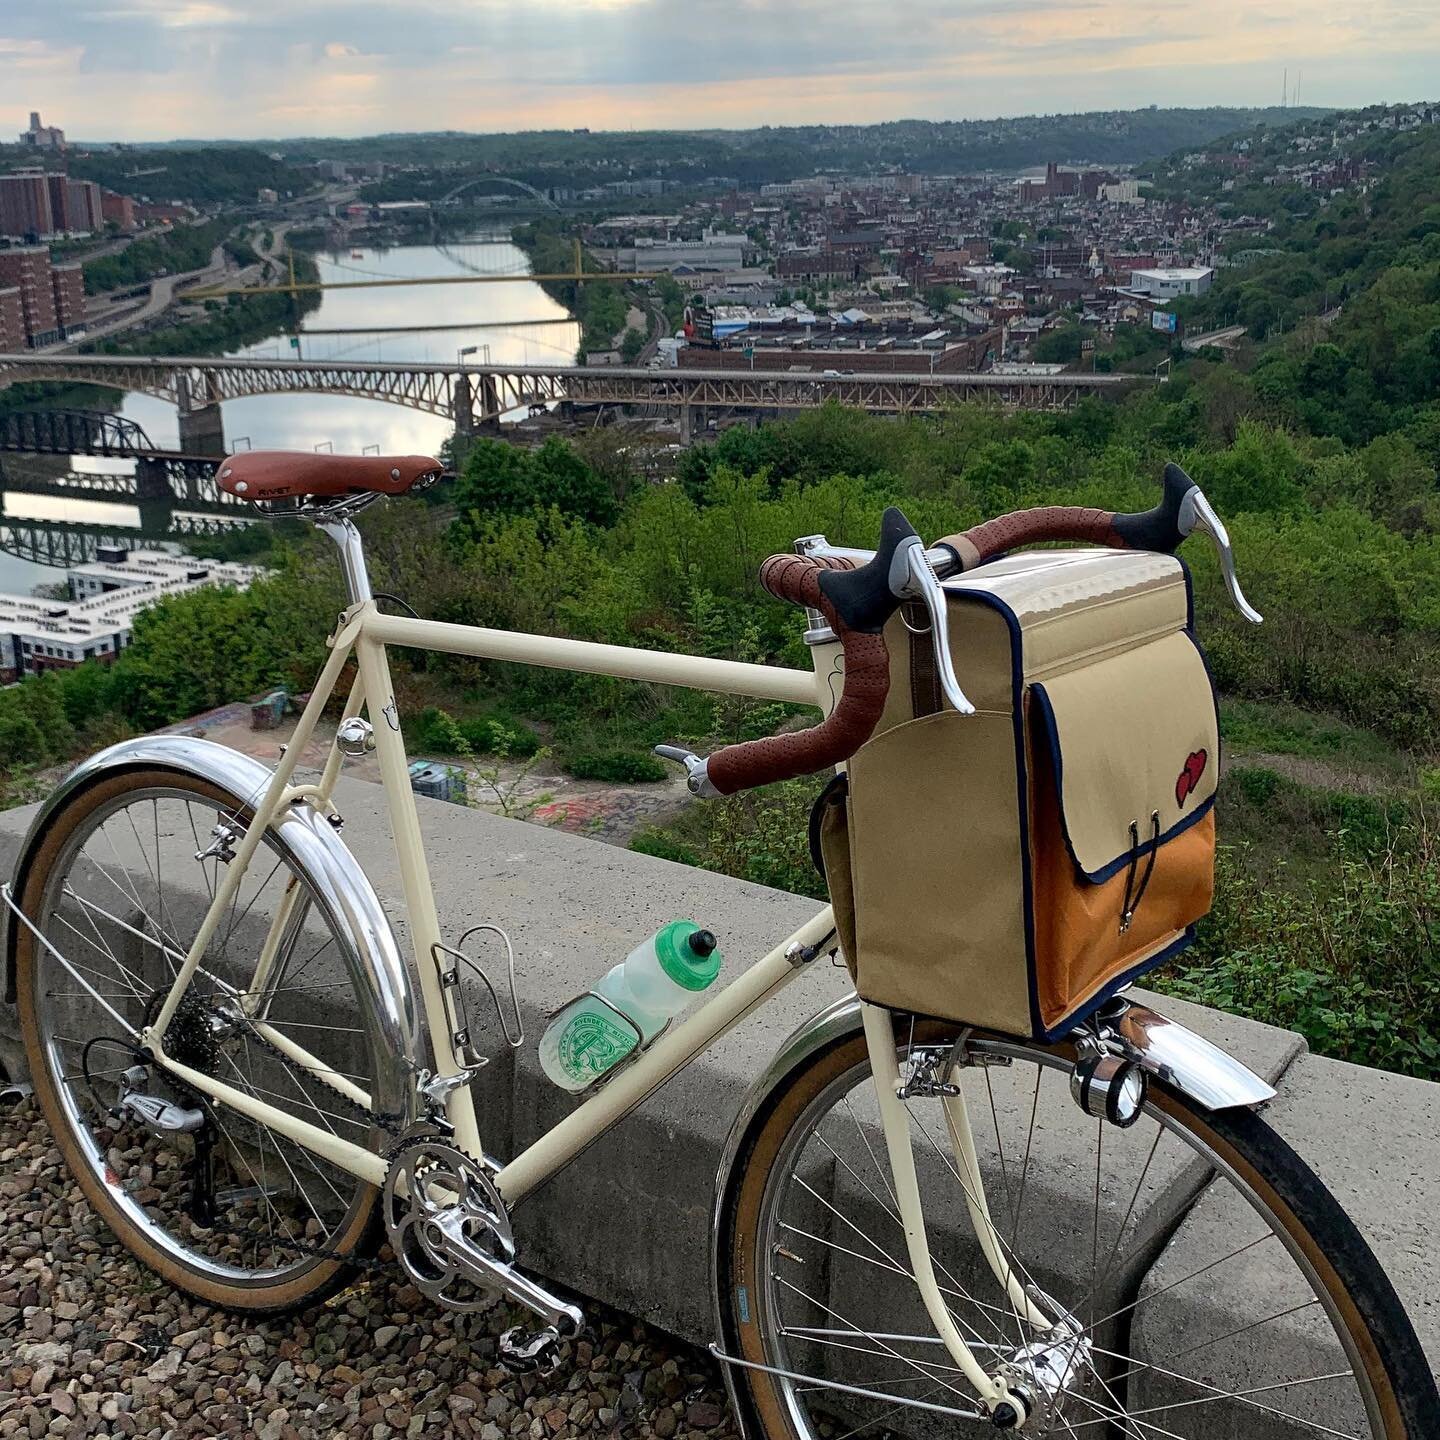 Vanilla Shake randonneuring bicycle. The healthy way to social distance. This full custom bike got a very special handle bar bag, custom made by @ruthworkssf and I gotta say those colors go very well. Thanks Eli! Get in on the next round of batch bui